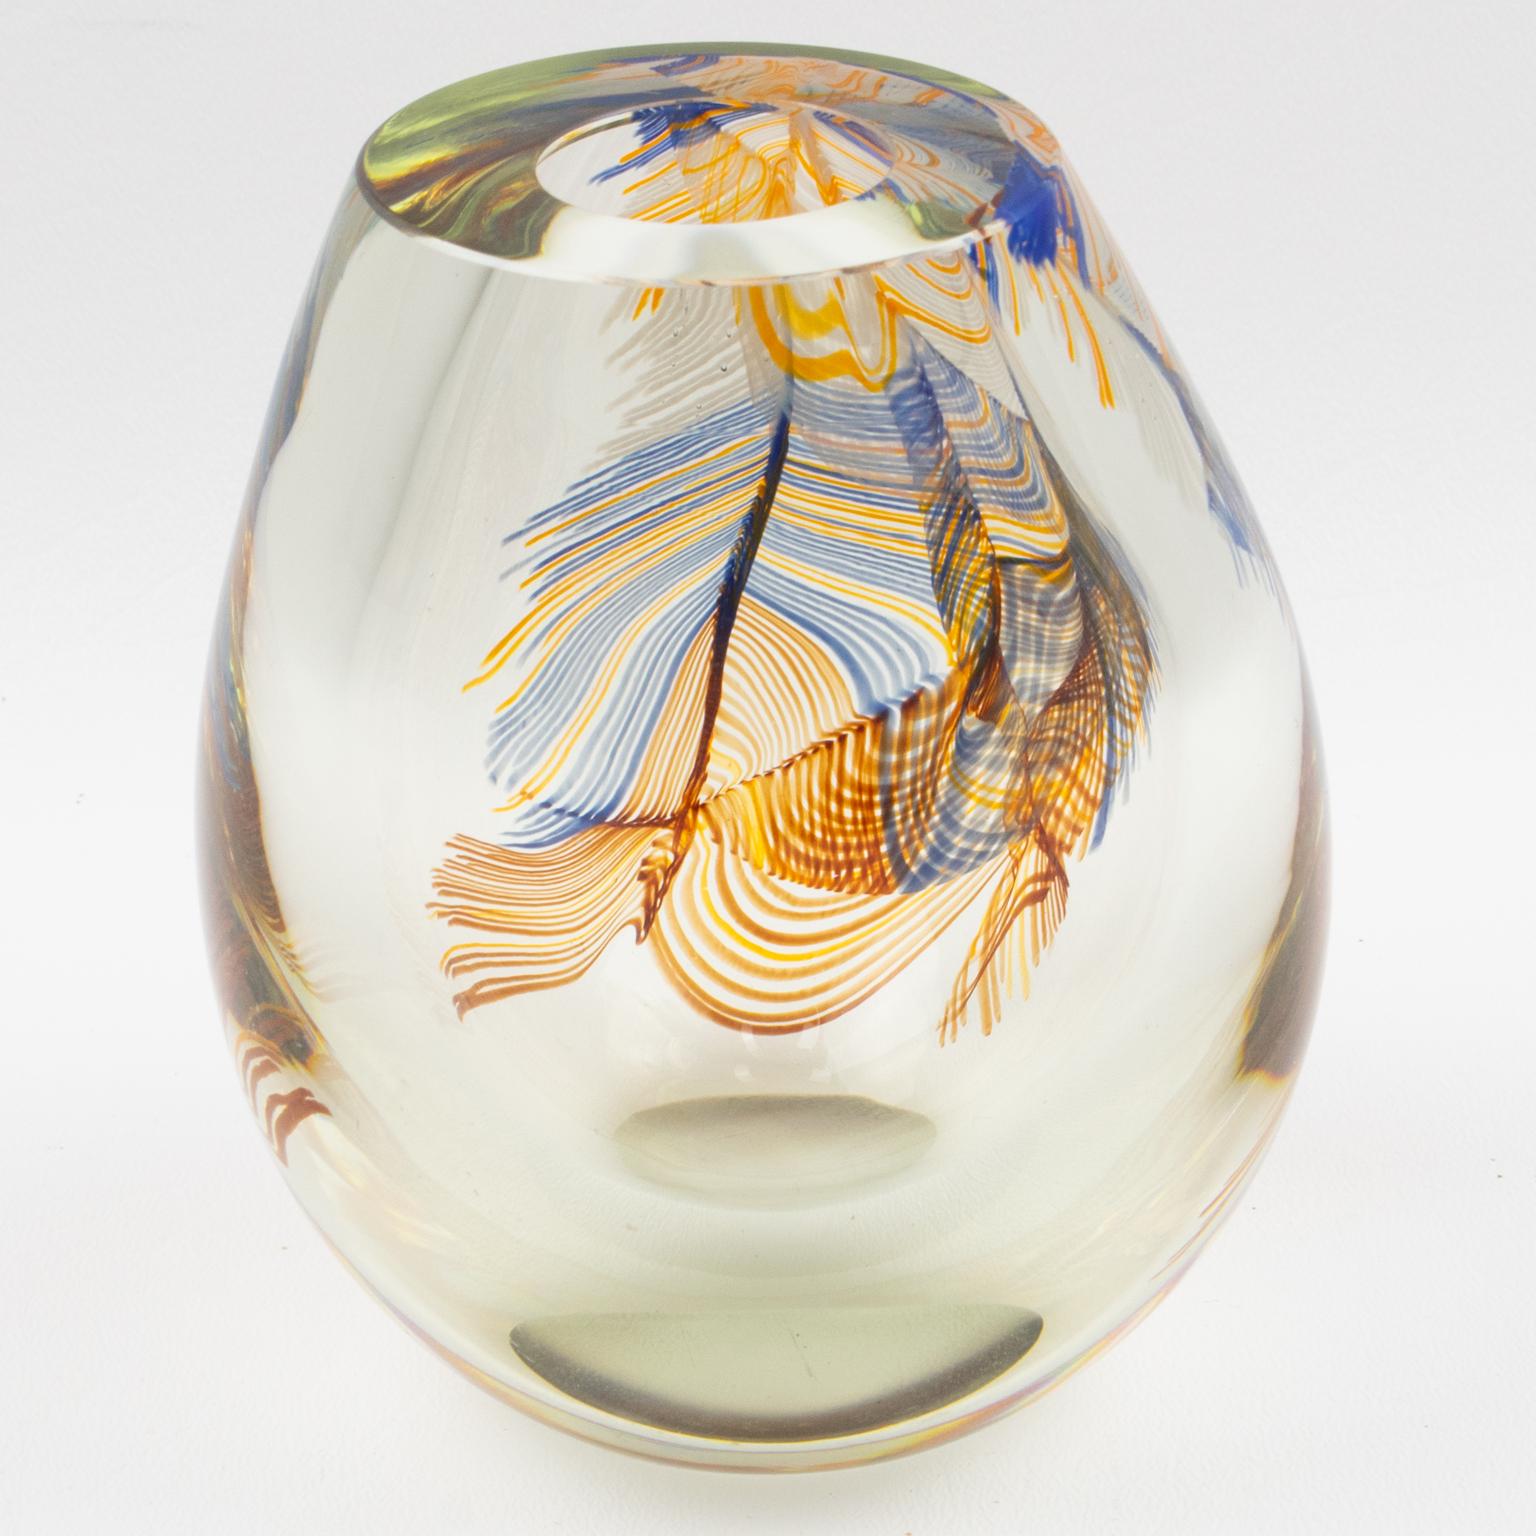 Stephen Smyers Modern Blown Art Glass Vase Abstract Feather Design, 1979 In Excellent Condition For Sale In Atlanta, GA